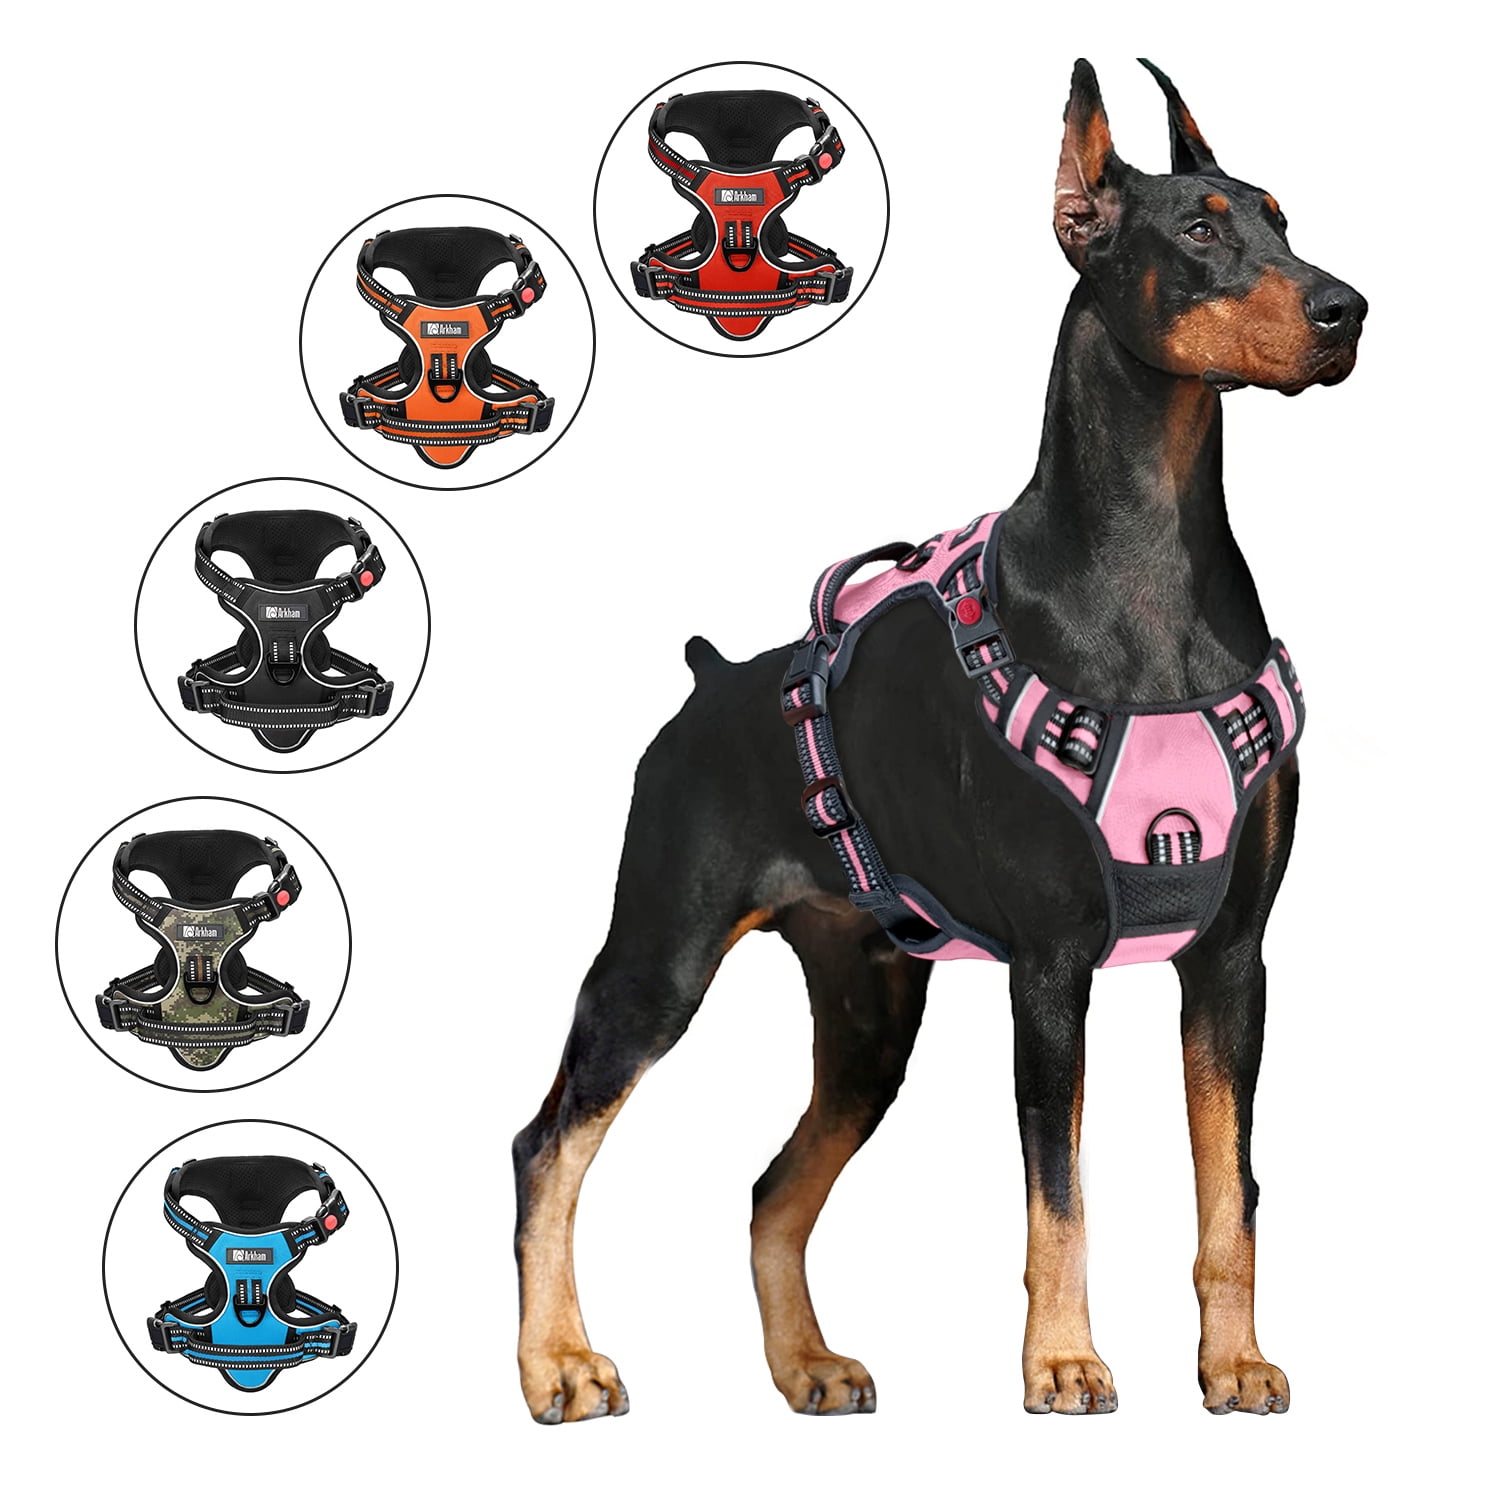  IVY&LANE No Pull Dog Harness for Small Dogs, Dog Vest Harness  with Leash, Safety Belt and Storage Strap, Fully Adjustable Harness, 360°  Reflective Strip, Soft Handle (Blue, XS) : Pet Supplies